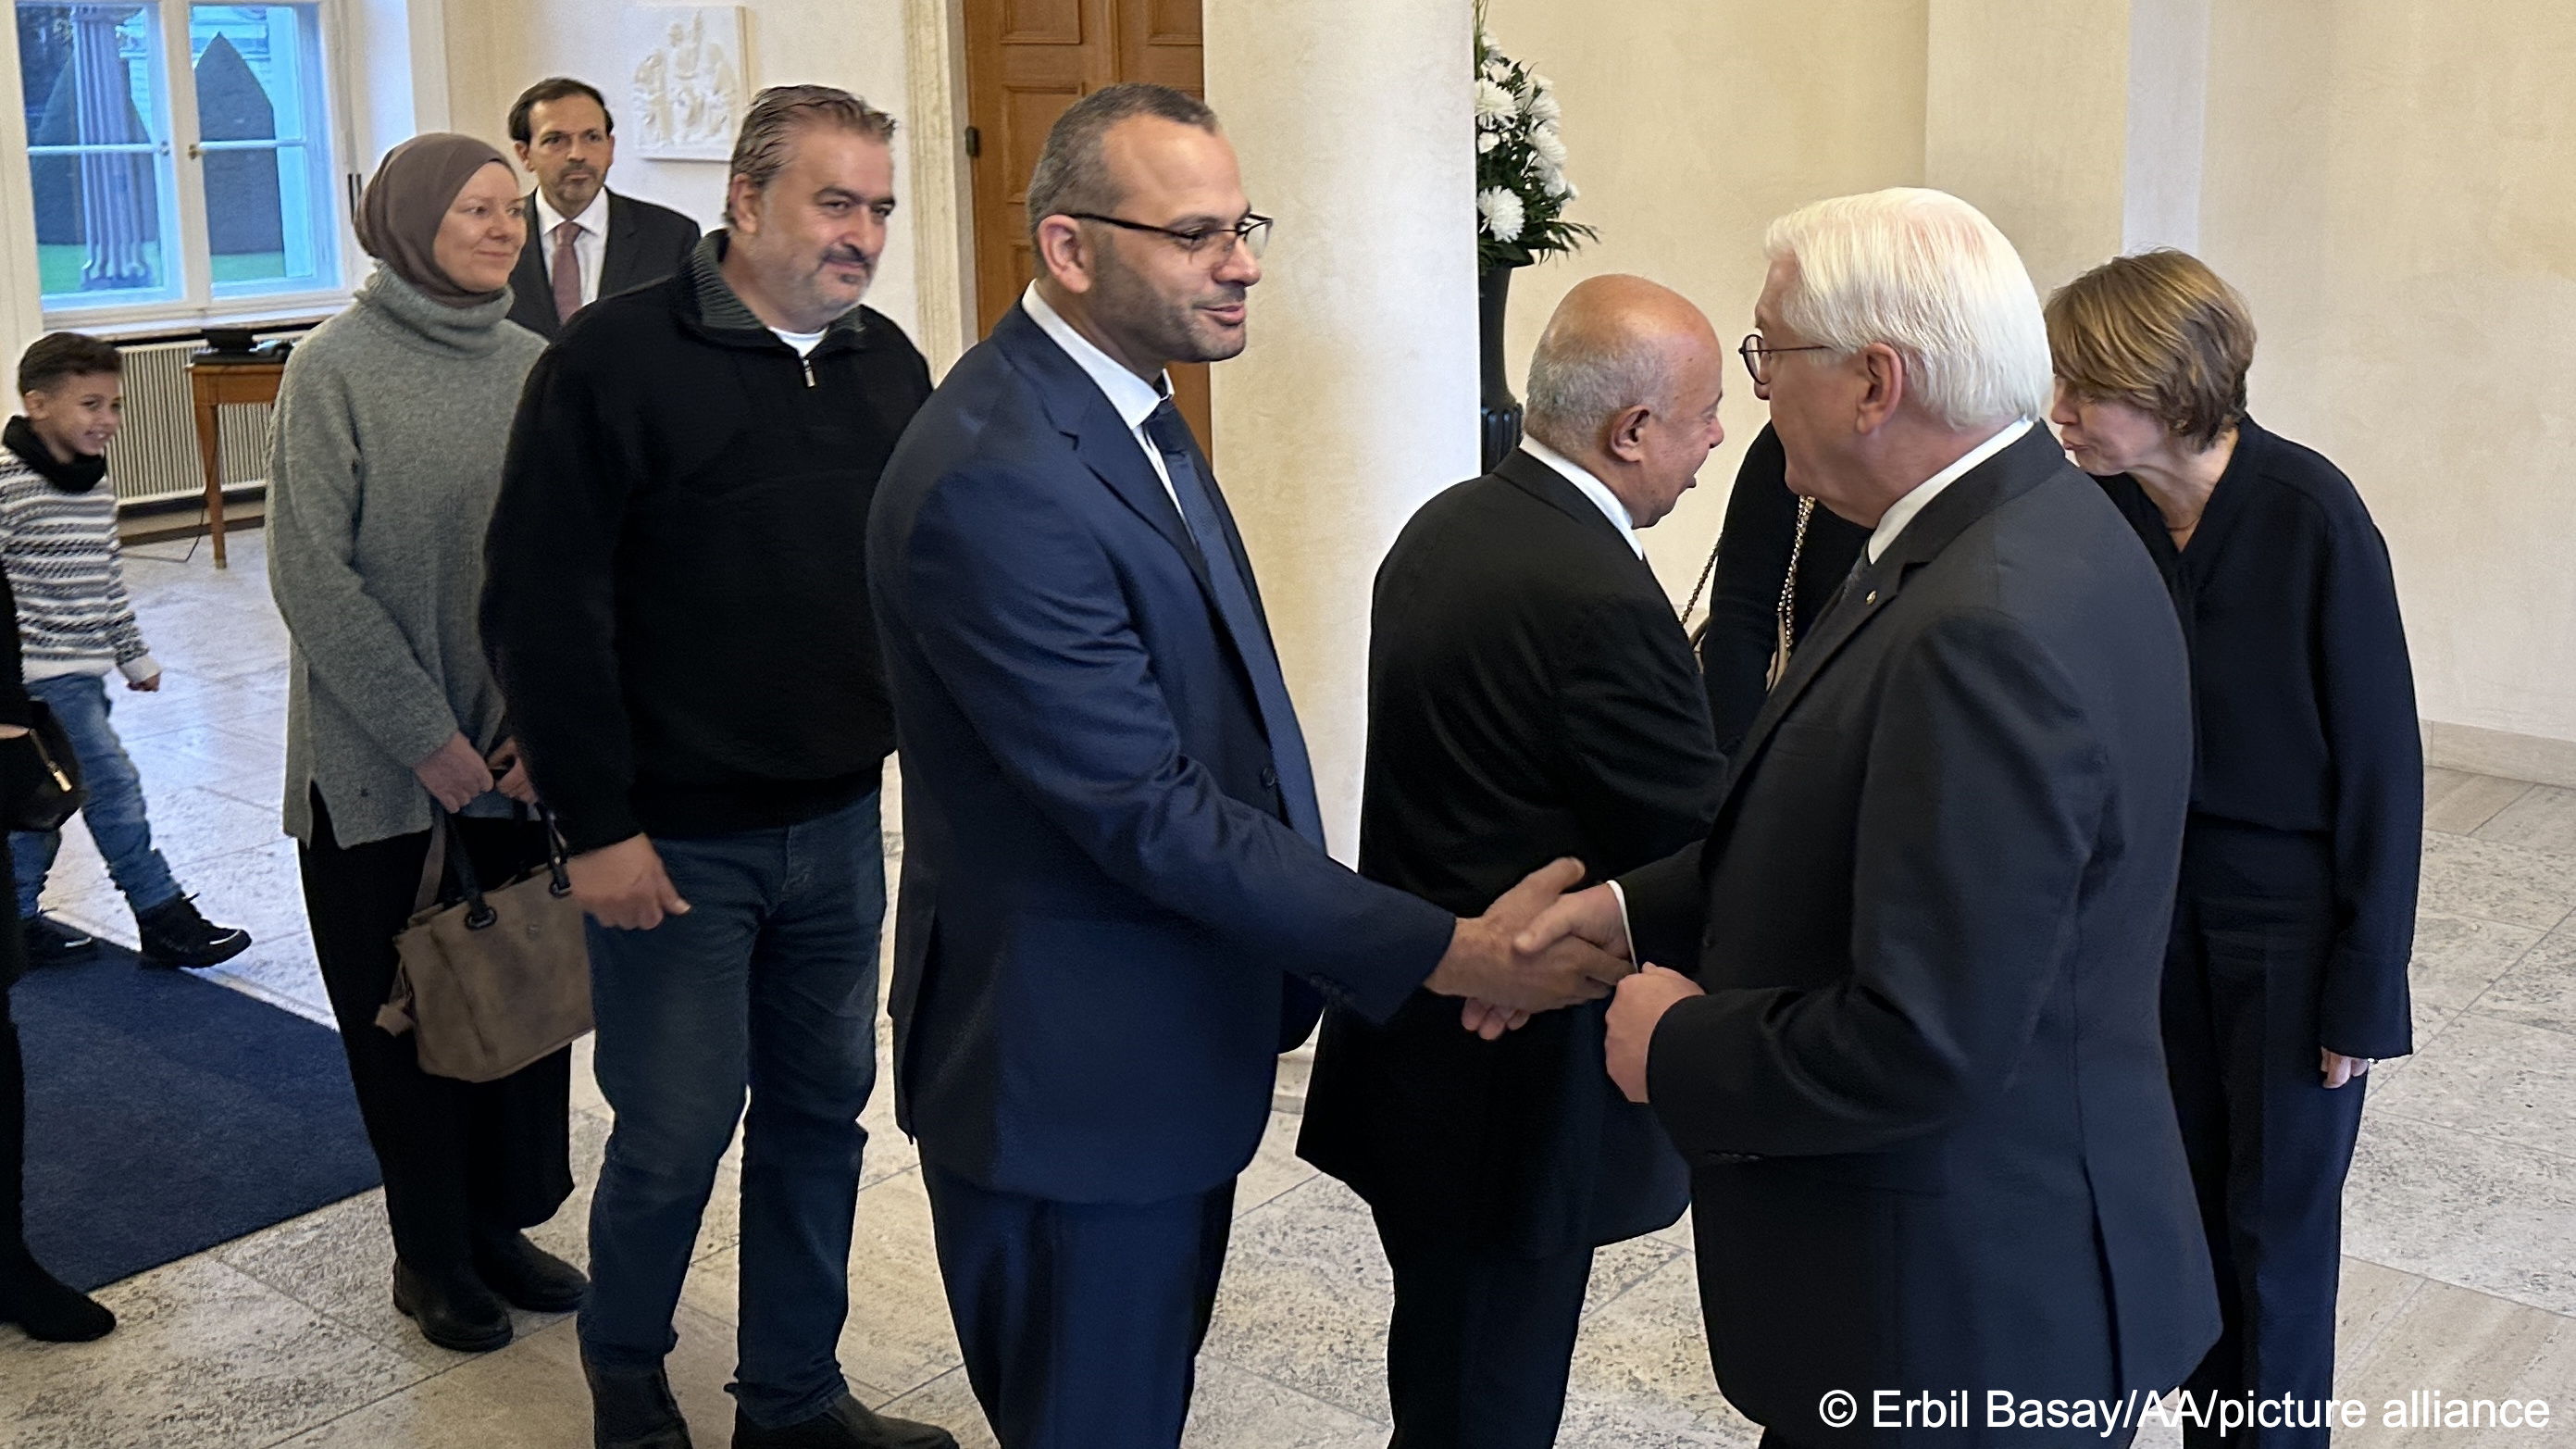 Ahmed Abunada in suit and glasses shakes hands with German President Frank-Walter Steinmeier (right), amidst a group of people waiting to be greeted